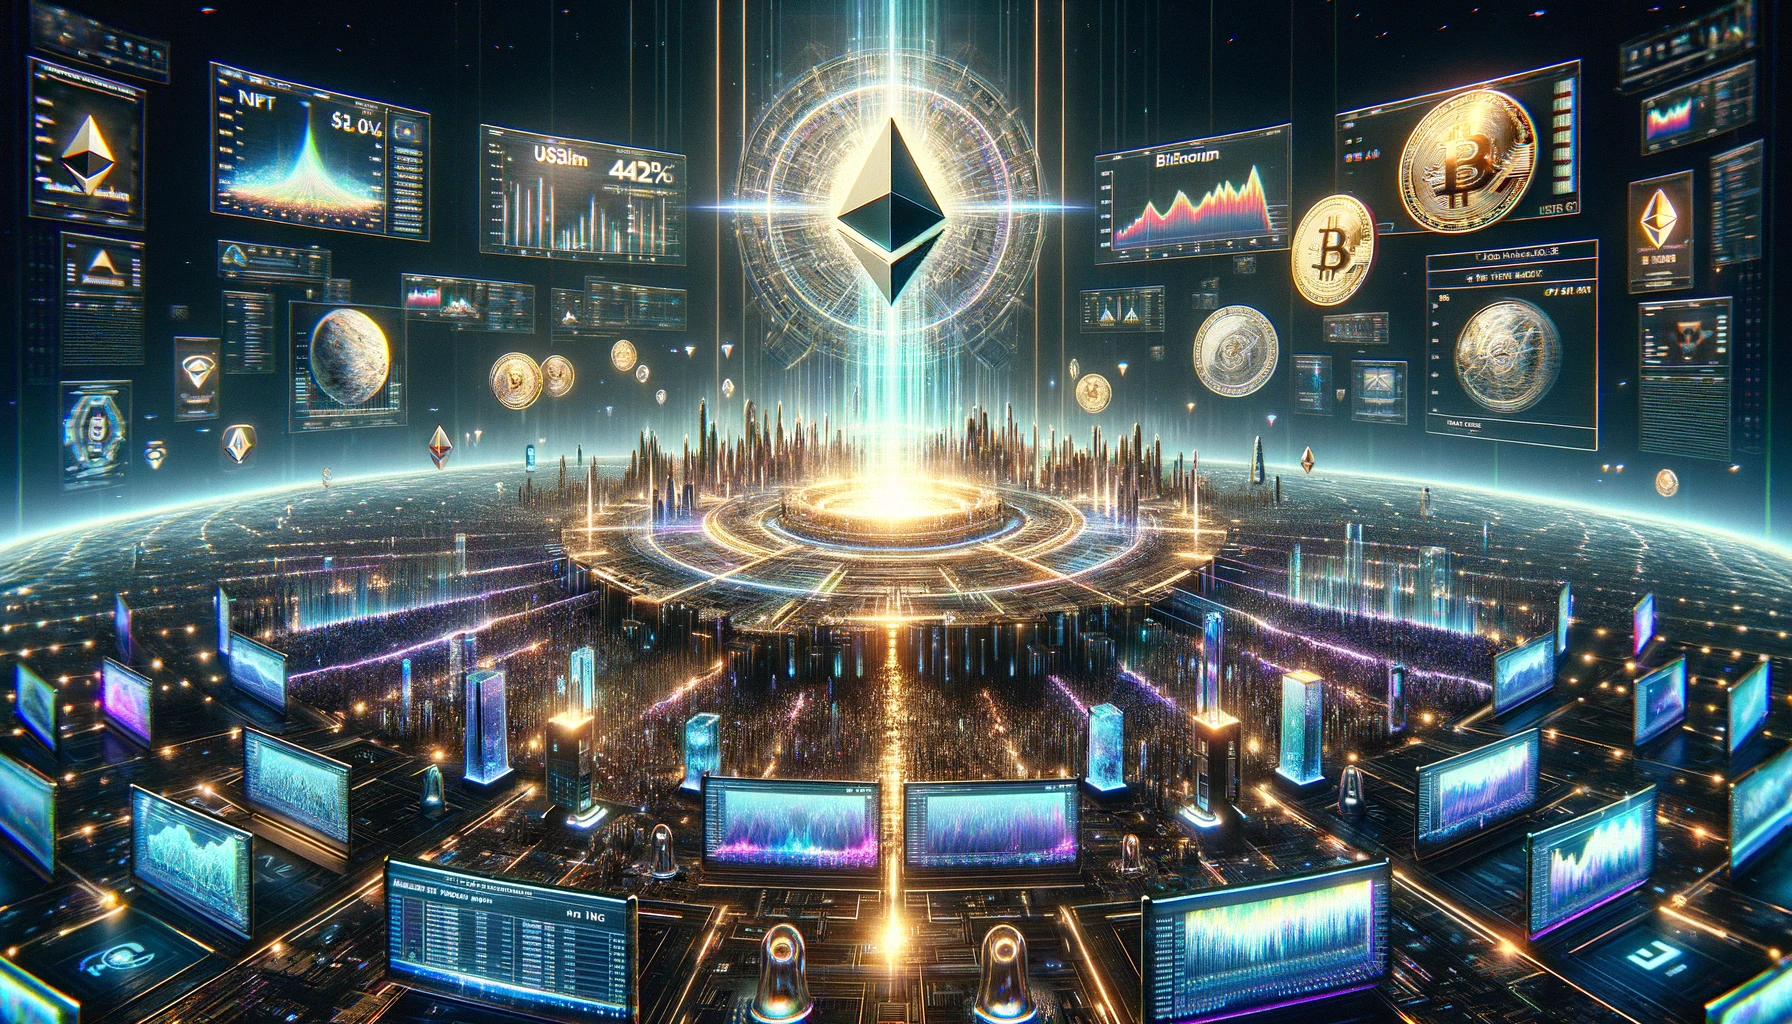 DALL·E 2024-04-05 15.16.39 - Visualize the dominance of Ethereum in the NFT market, capturing a moment of record-breaking sales. The scene unfolds on a grand digital arena, with E